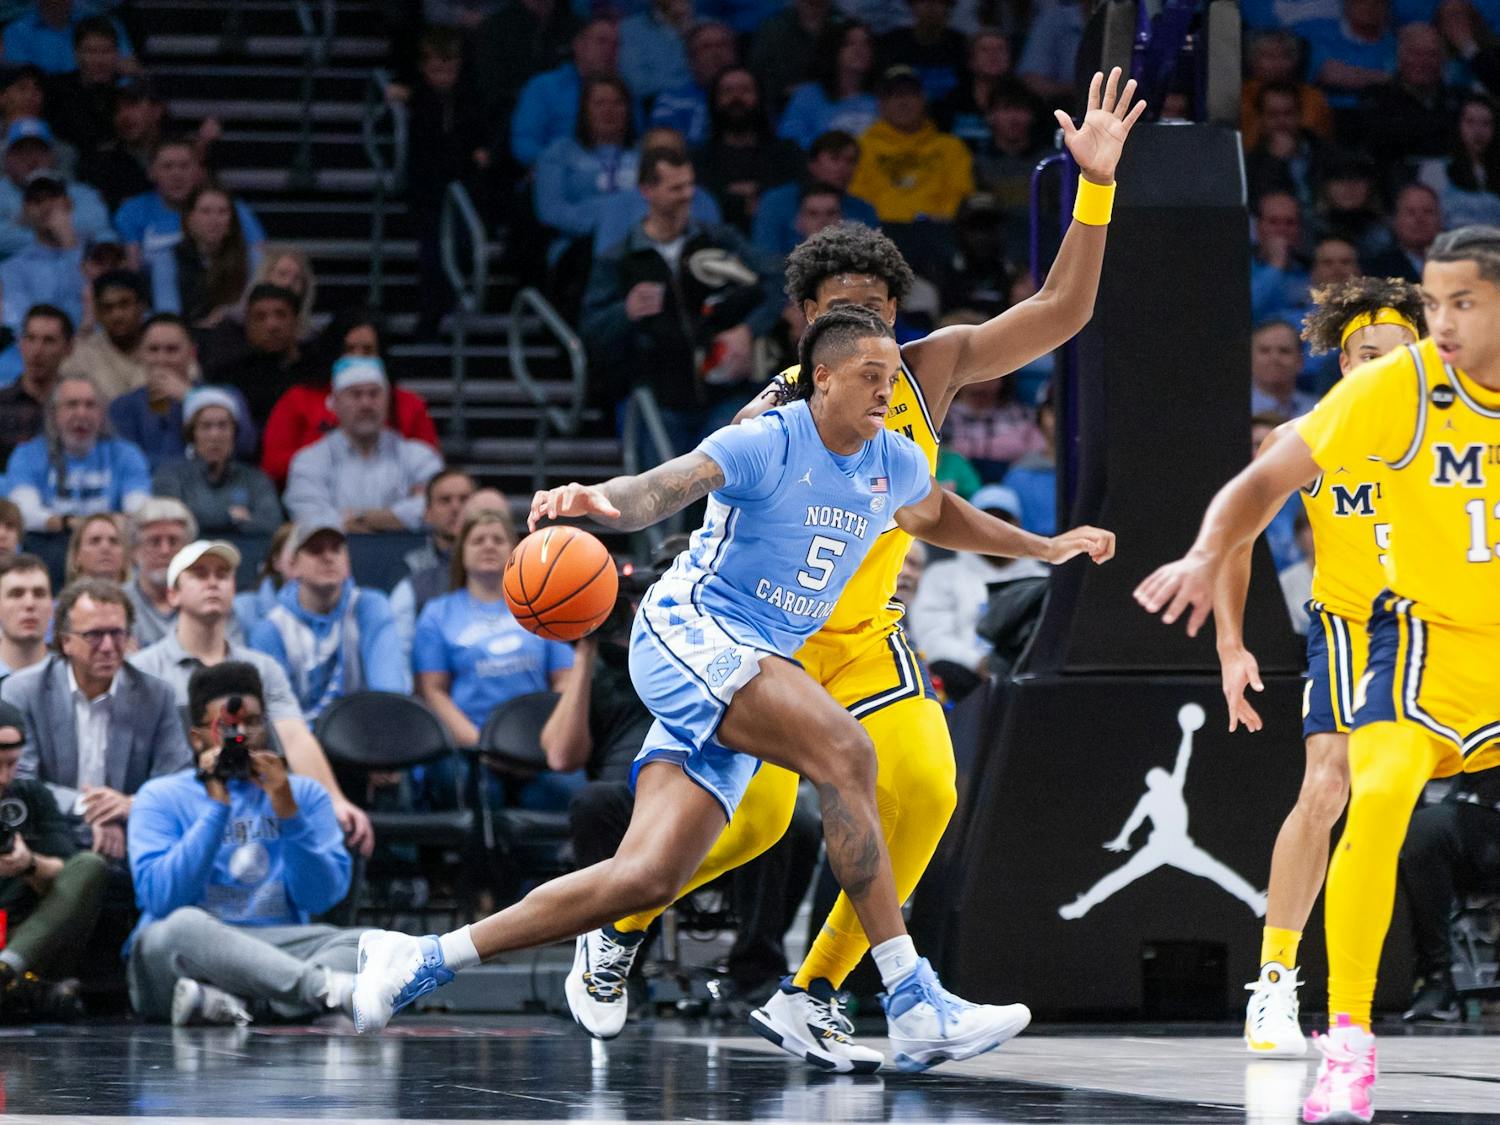 UNC senior forward/center Armando Bacot (5) dribbles the ball during the men's basketball game against Michigan at the Jumpman Invitational in Charlotte, N.C., on Wednesday, Dec. 21, 2022. UNC beat Michigan 80-76.